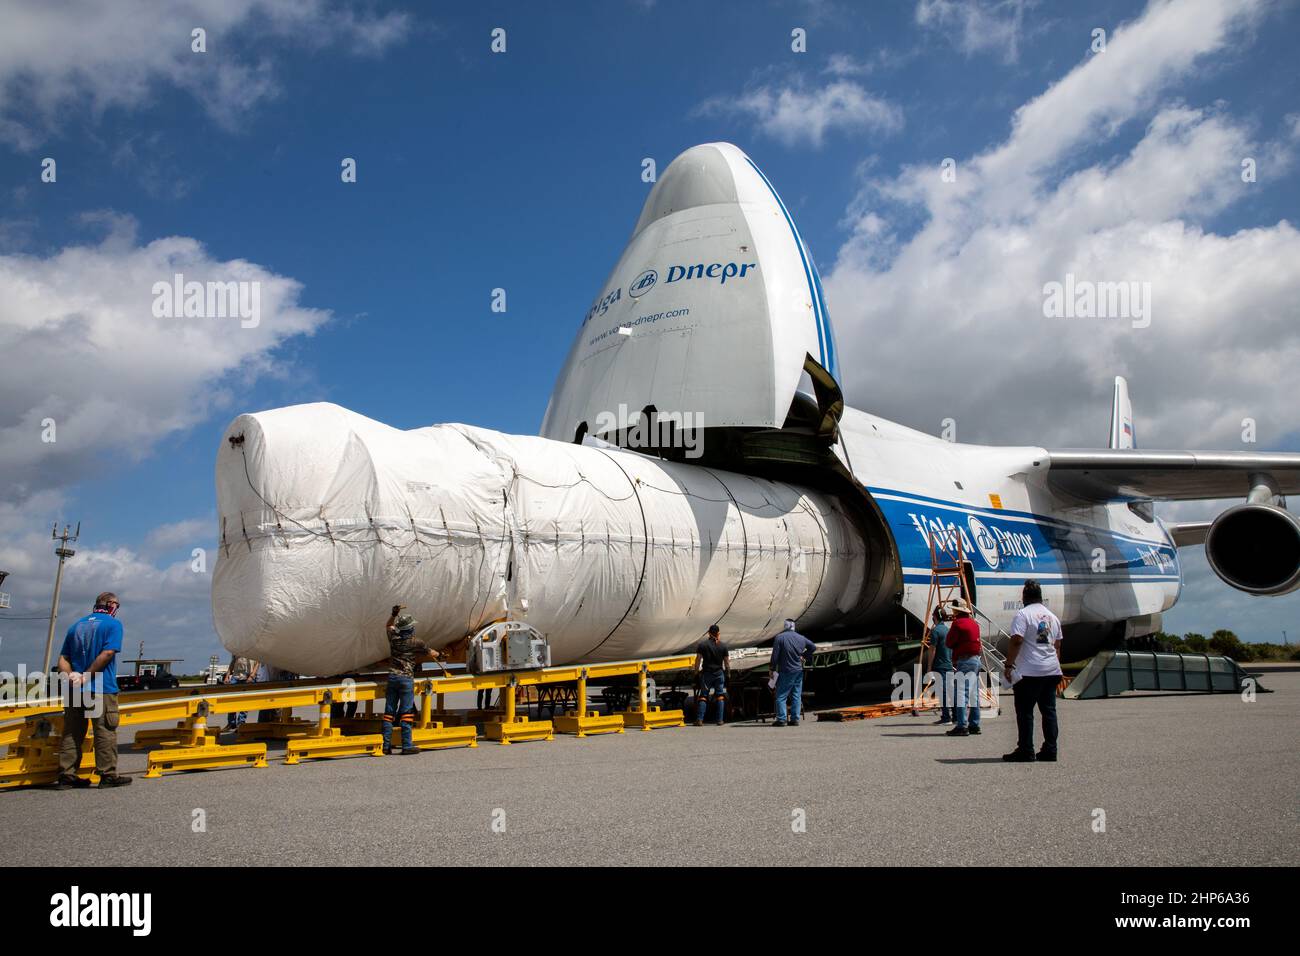 The United Launch Alliance booster for NASA’s Mars Perseverance rover is offloaded from the Antonov 124 cargo aircraft at the Skid Strip at Cape Canaveral Air Force Station (CCAFS) in Florida on May 19, 2020. The Mars Perseverance rover is scheduled to launch in mid-July atop a United Launch Alliance Atlas V 541 rocket from Pad 41 at CCAFS. The rover is part of NASA’s Mars Exploration Program, a long-term effort of robotic exploration of the Red Planet. The rover will search for habitable conditions in the ancient past and signs of past microbial life on Mars. The Launch Services Program at Ke Stock Photo